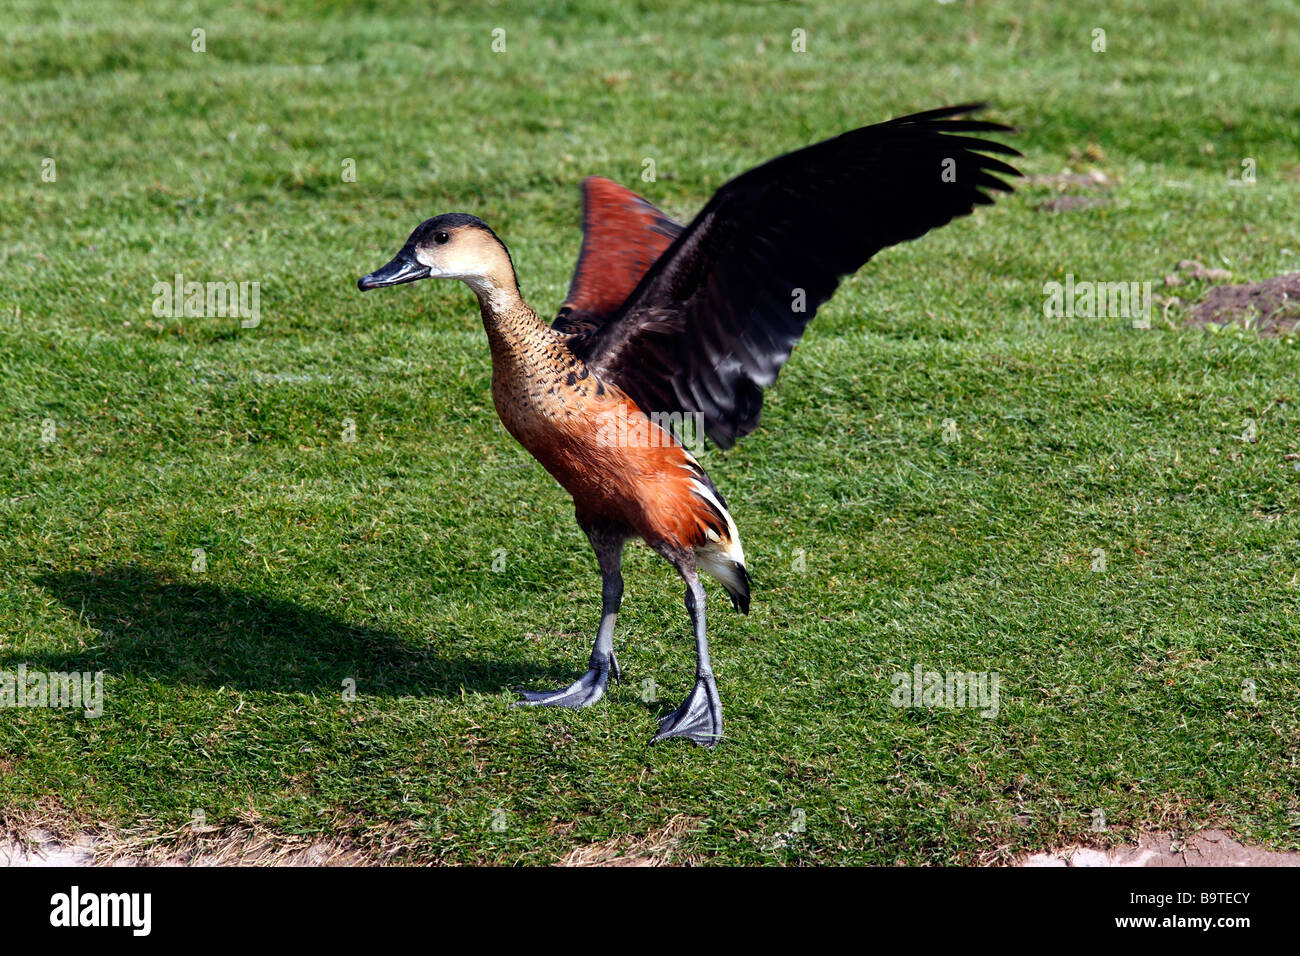 Young Whistling Duck flapping its wings Stock Photo